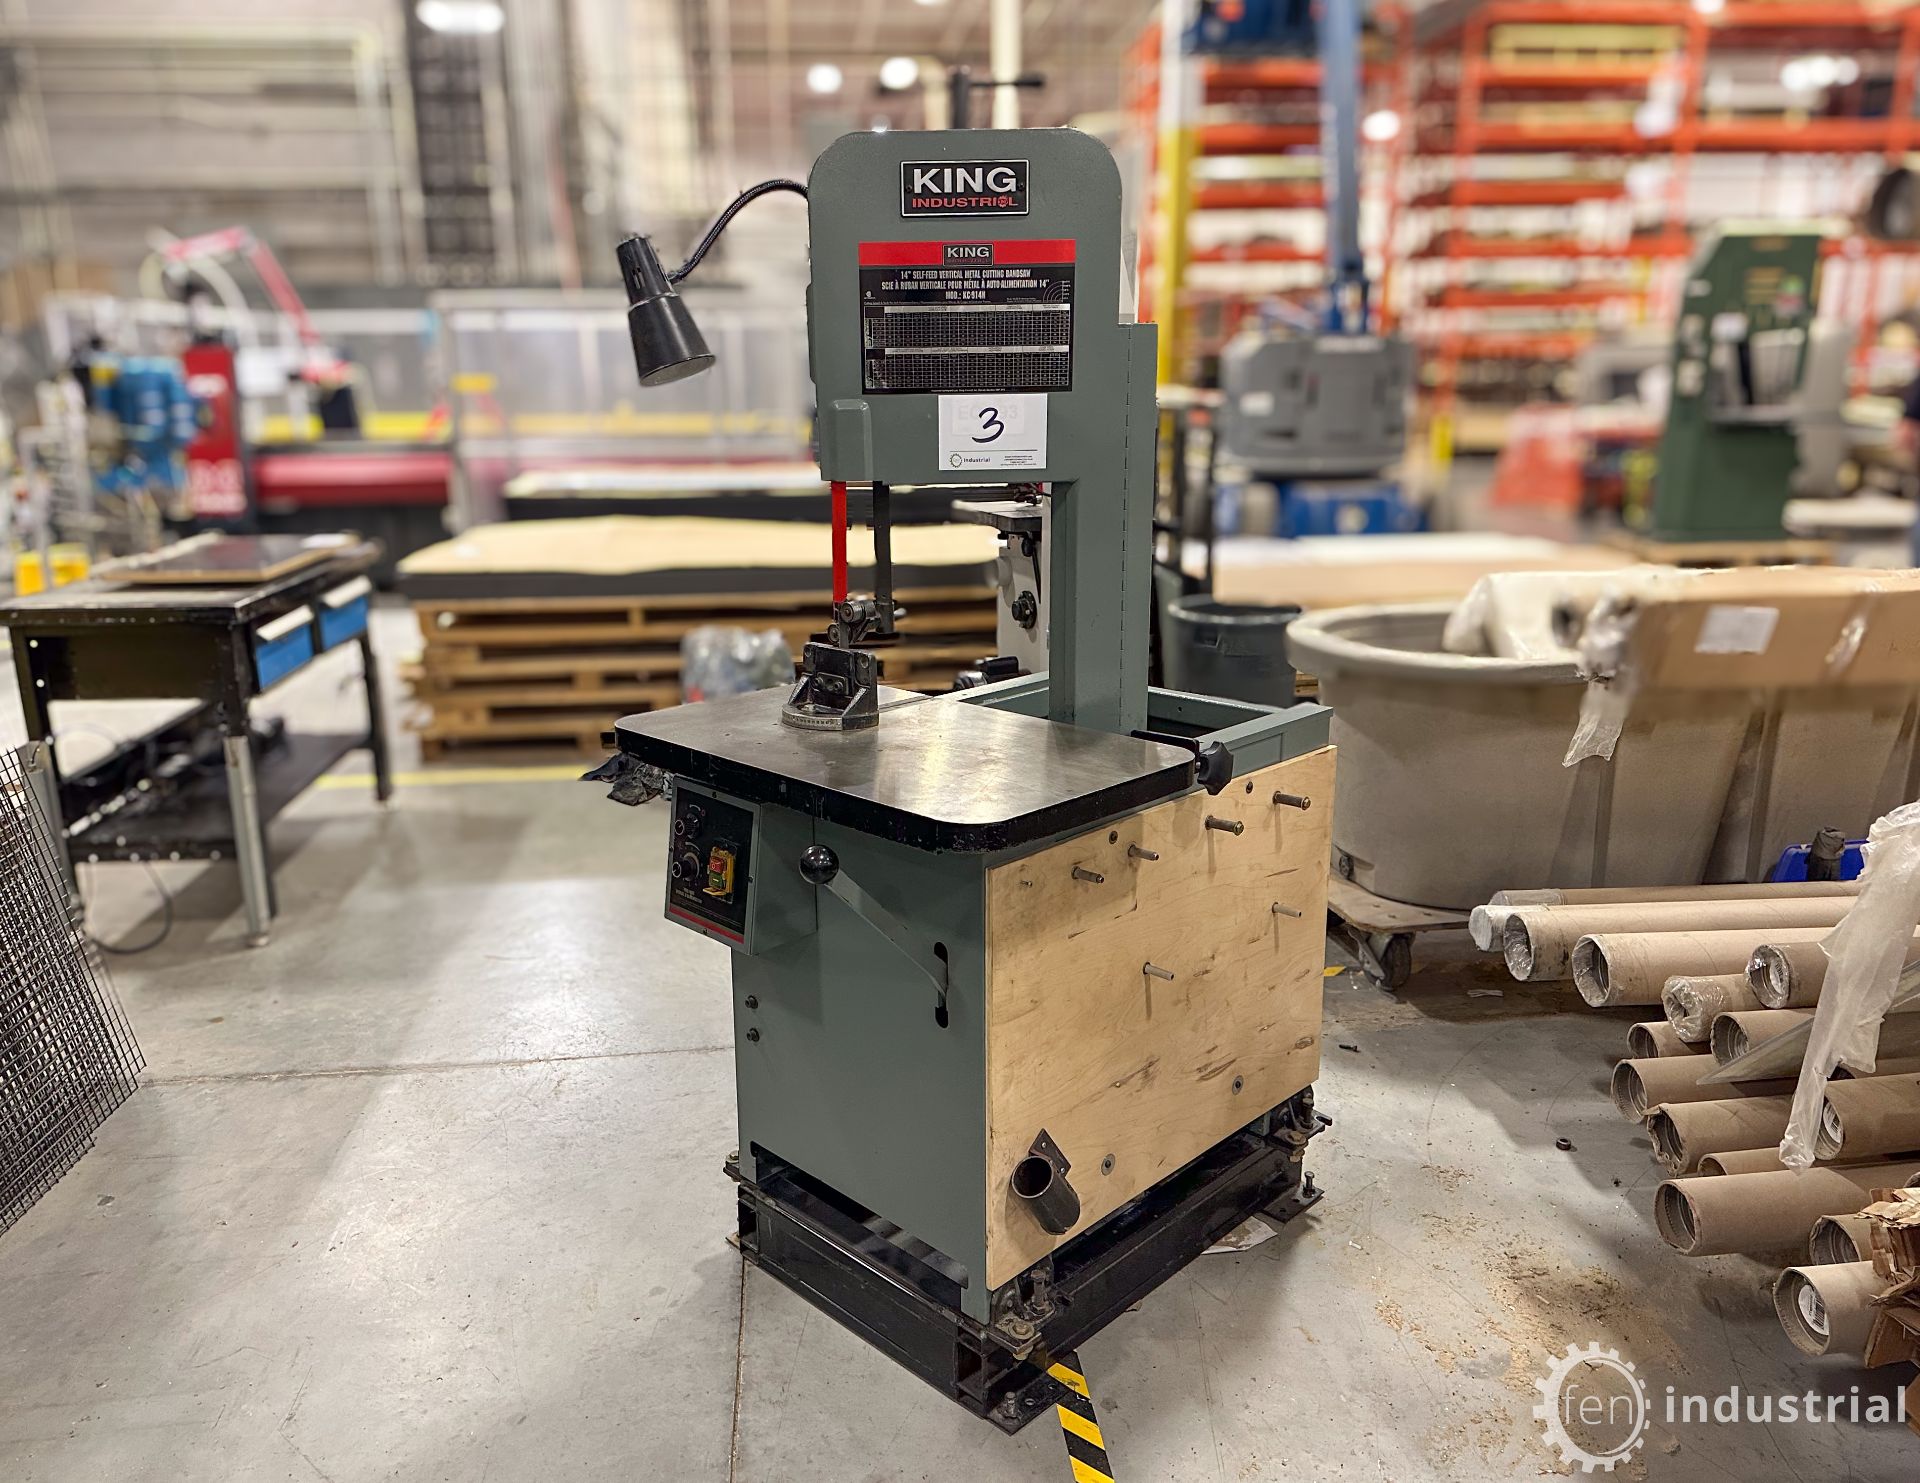 2011 KING INDUSTRIAL KC-914H 14” SELF-FEED / ROLL-IN VERTICAL METAL CUTTING BANDSAW, 1,725 RPM, - Image 17 of 27